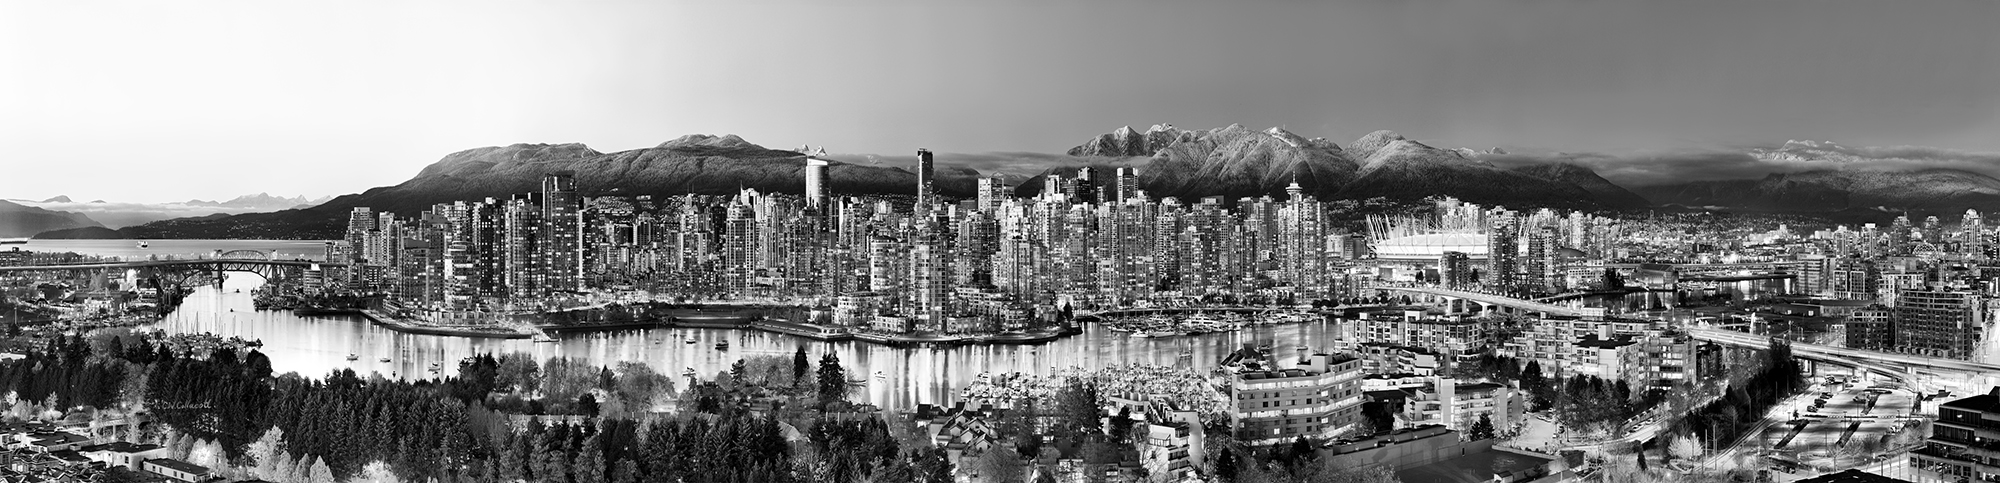 Ultra-High-Resolution-Panoramic-Image-Vancouver-Vancouver-Skyline-Westcoast-BC-Canada-Gigapixel-Black-and-White